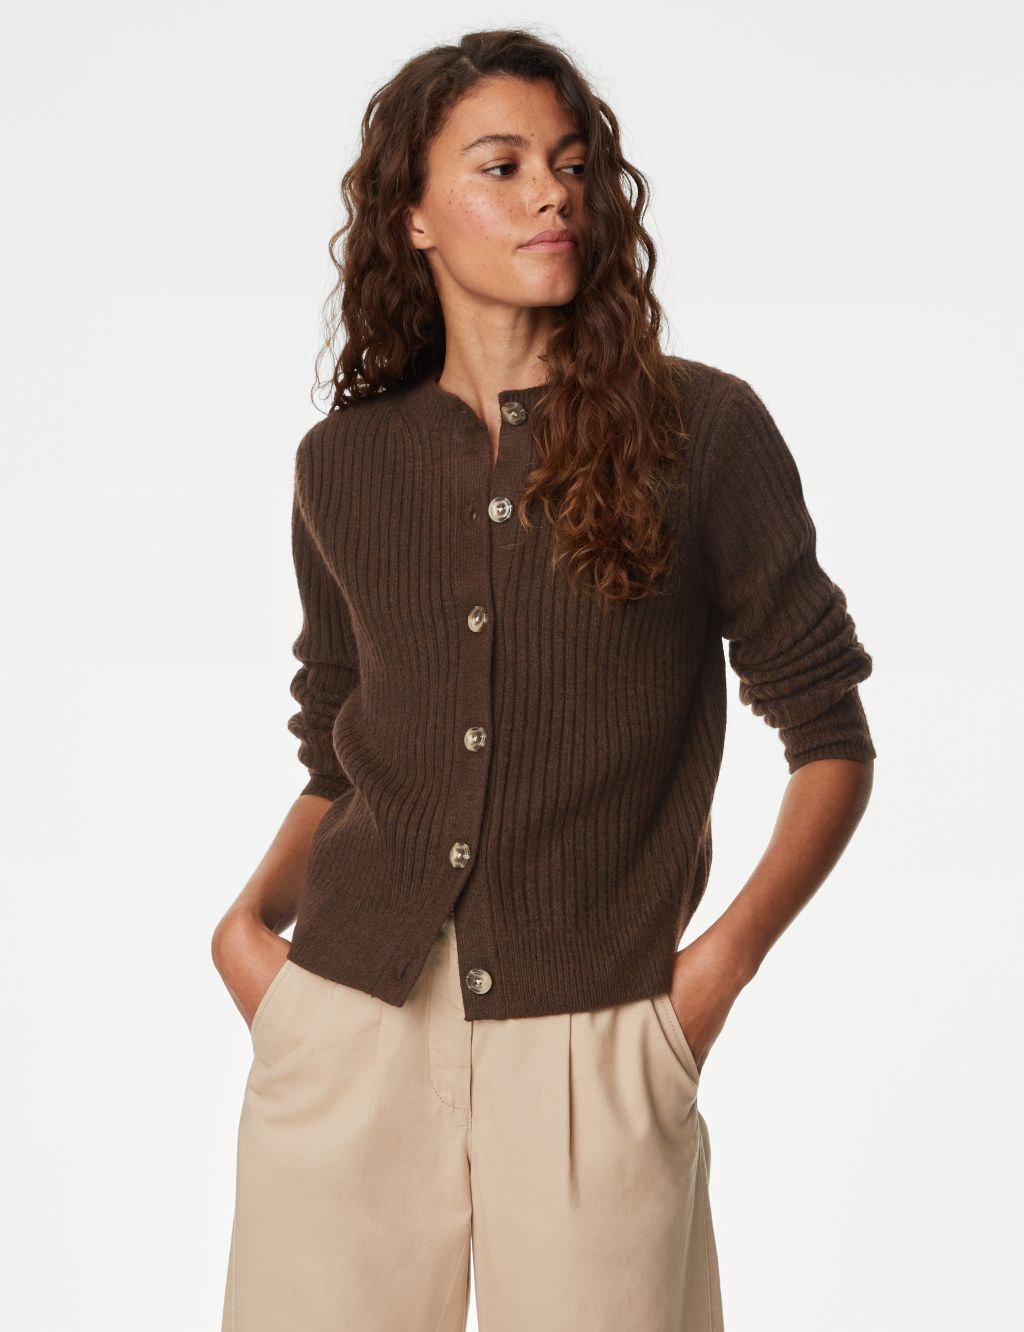 Knitted Ribbed Crew Neck Cardigan image 1